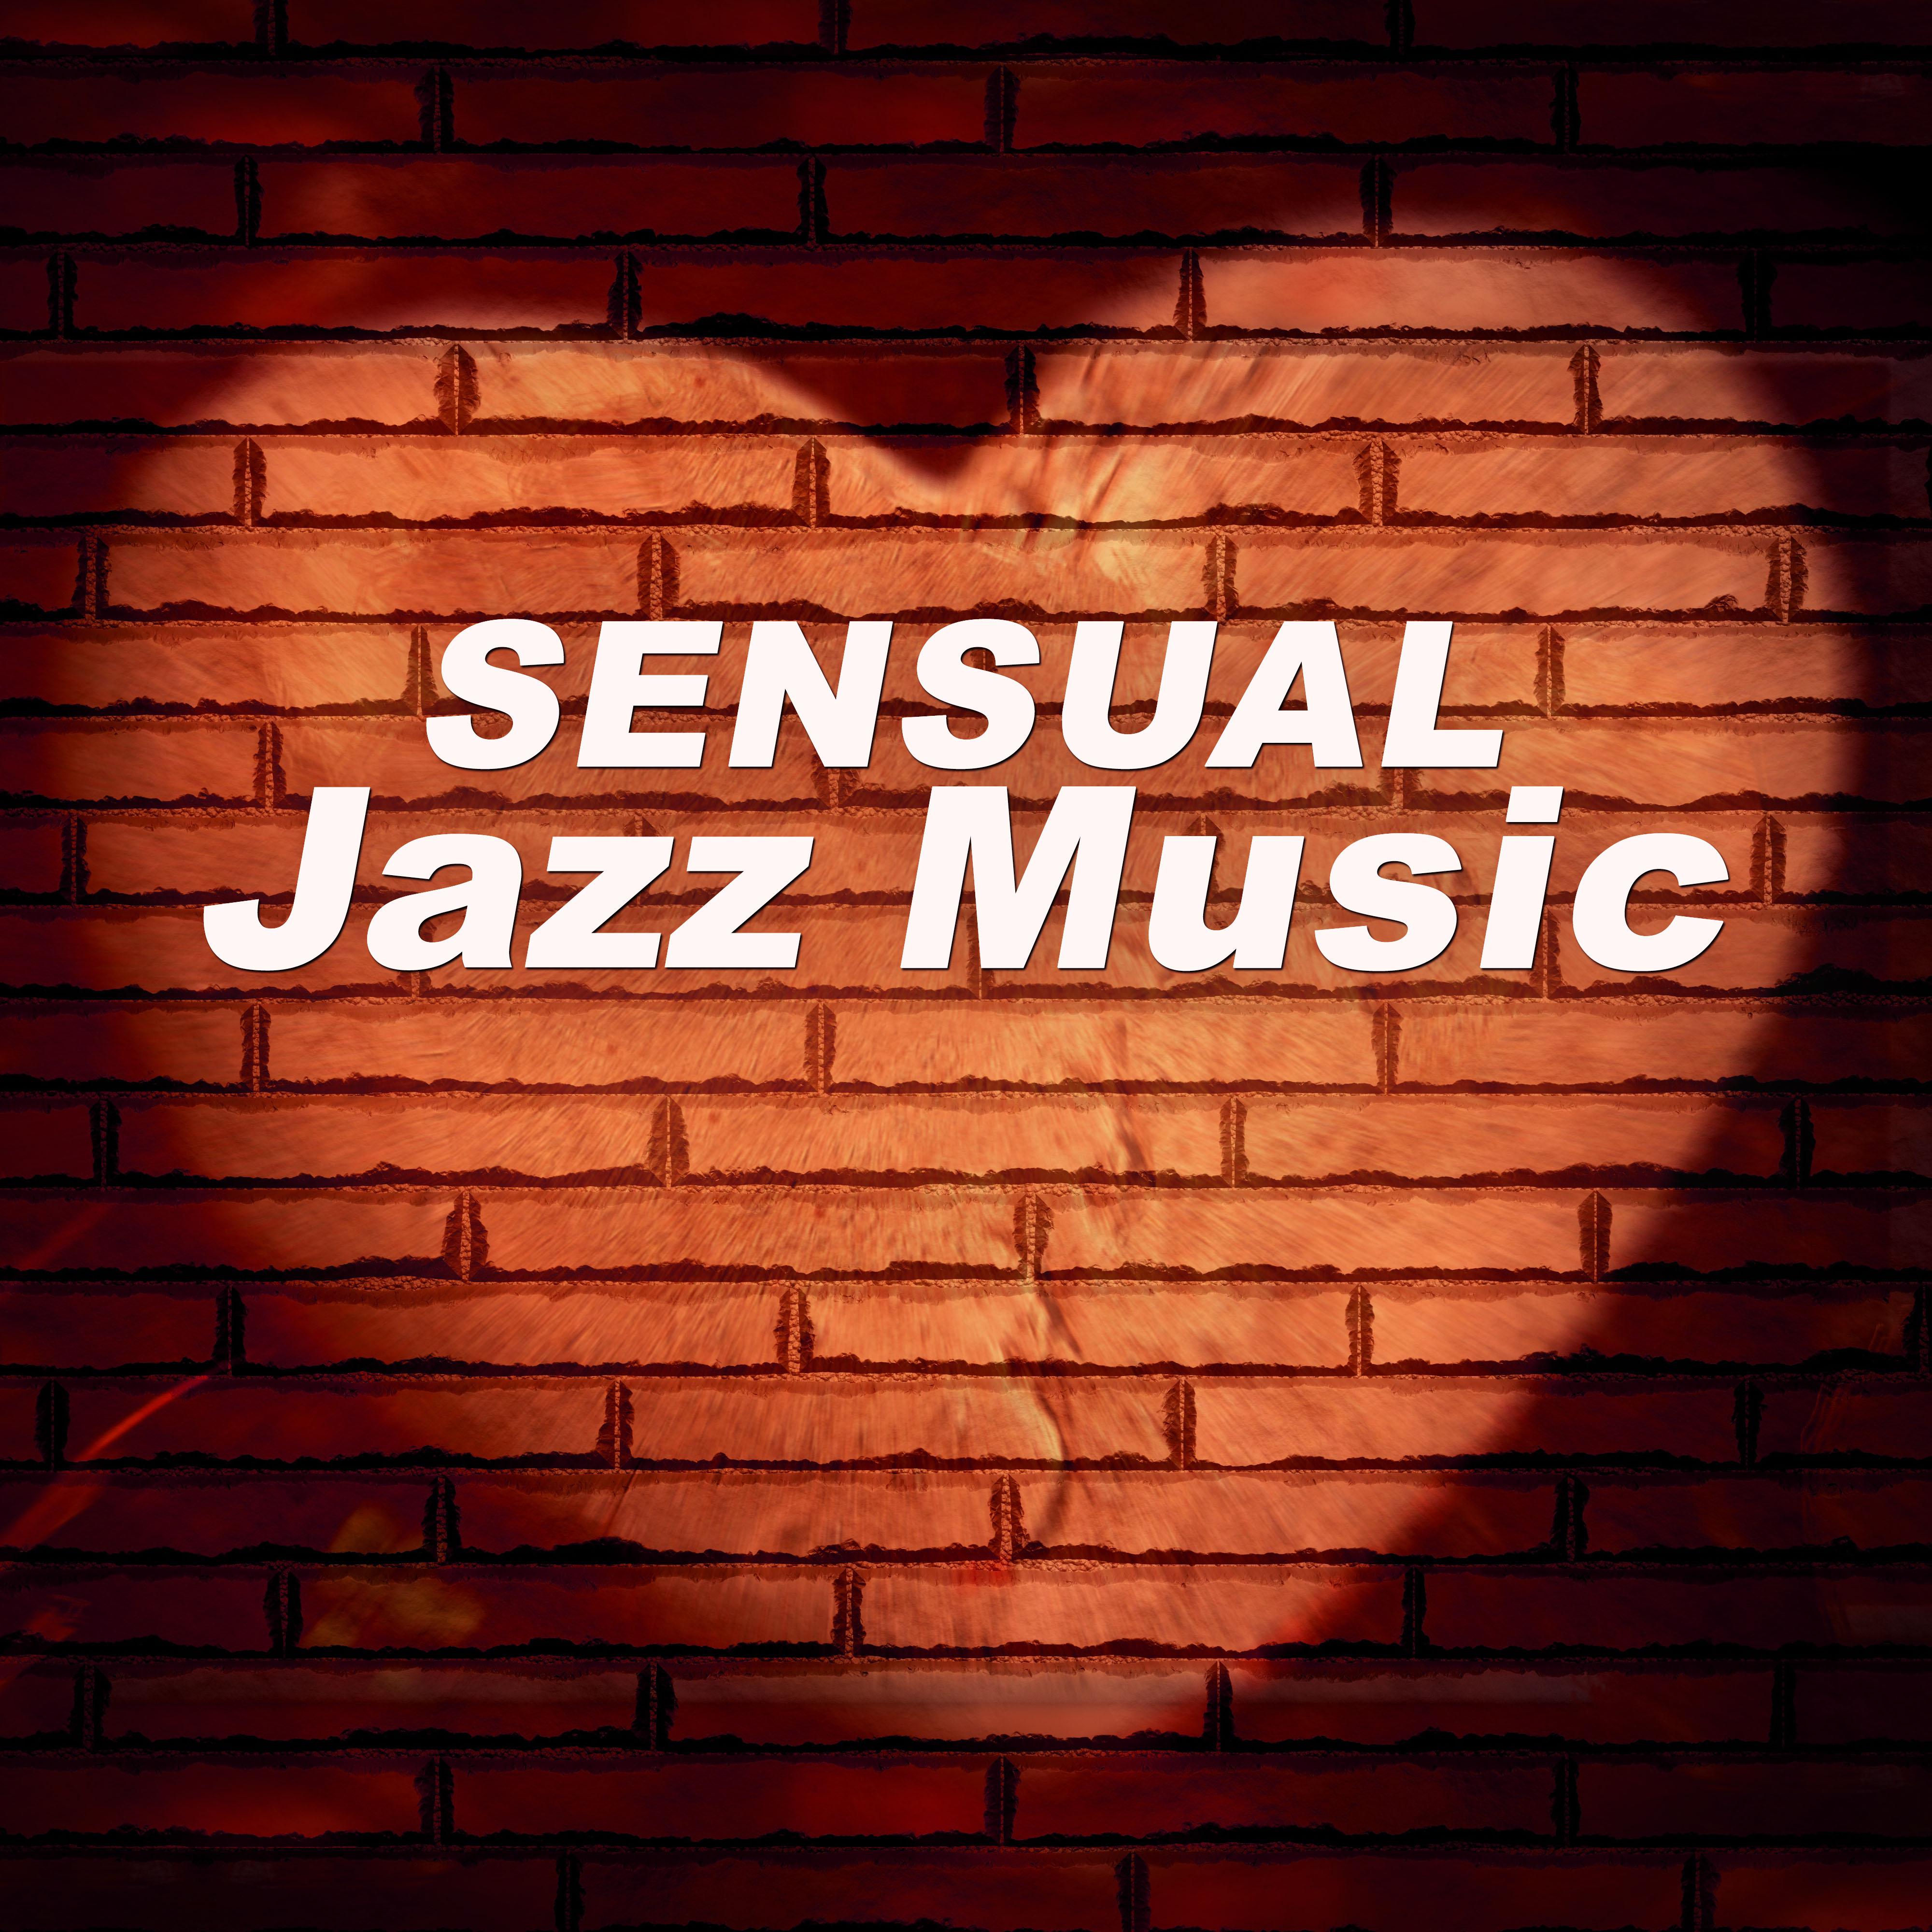 Sensual Jazz Music – **** Jazz, Erotic Music, Piano Bar, Evening Time With Candle, Background Music for Intimate Moments